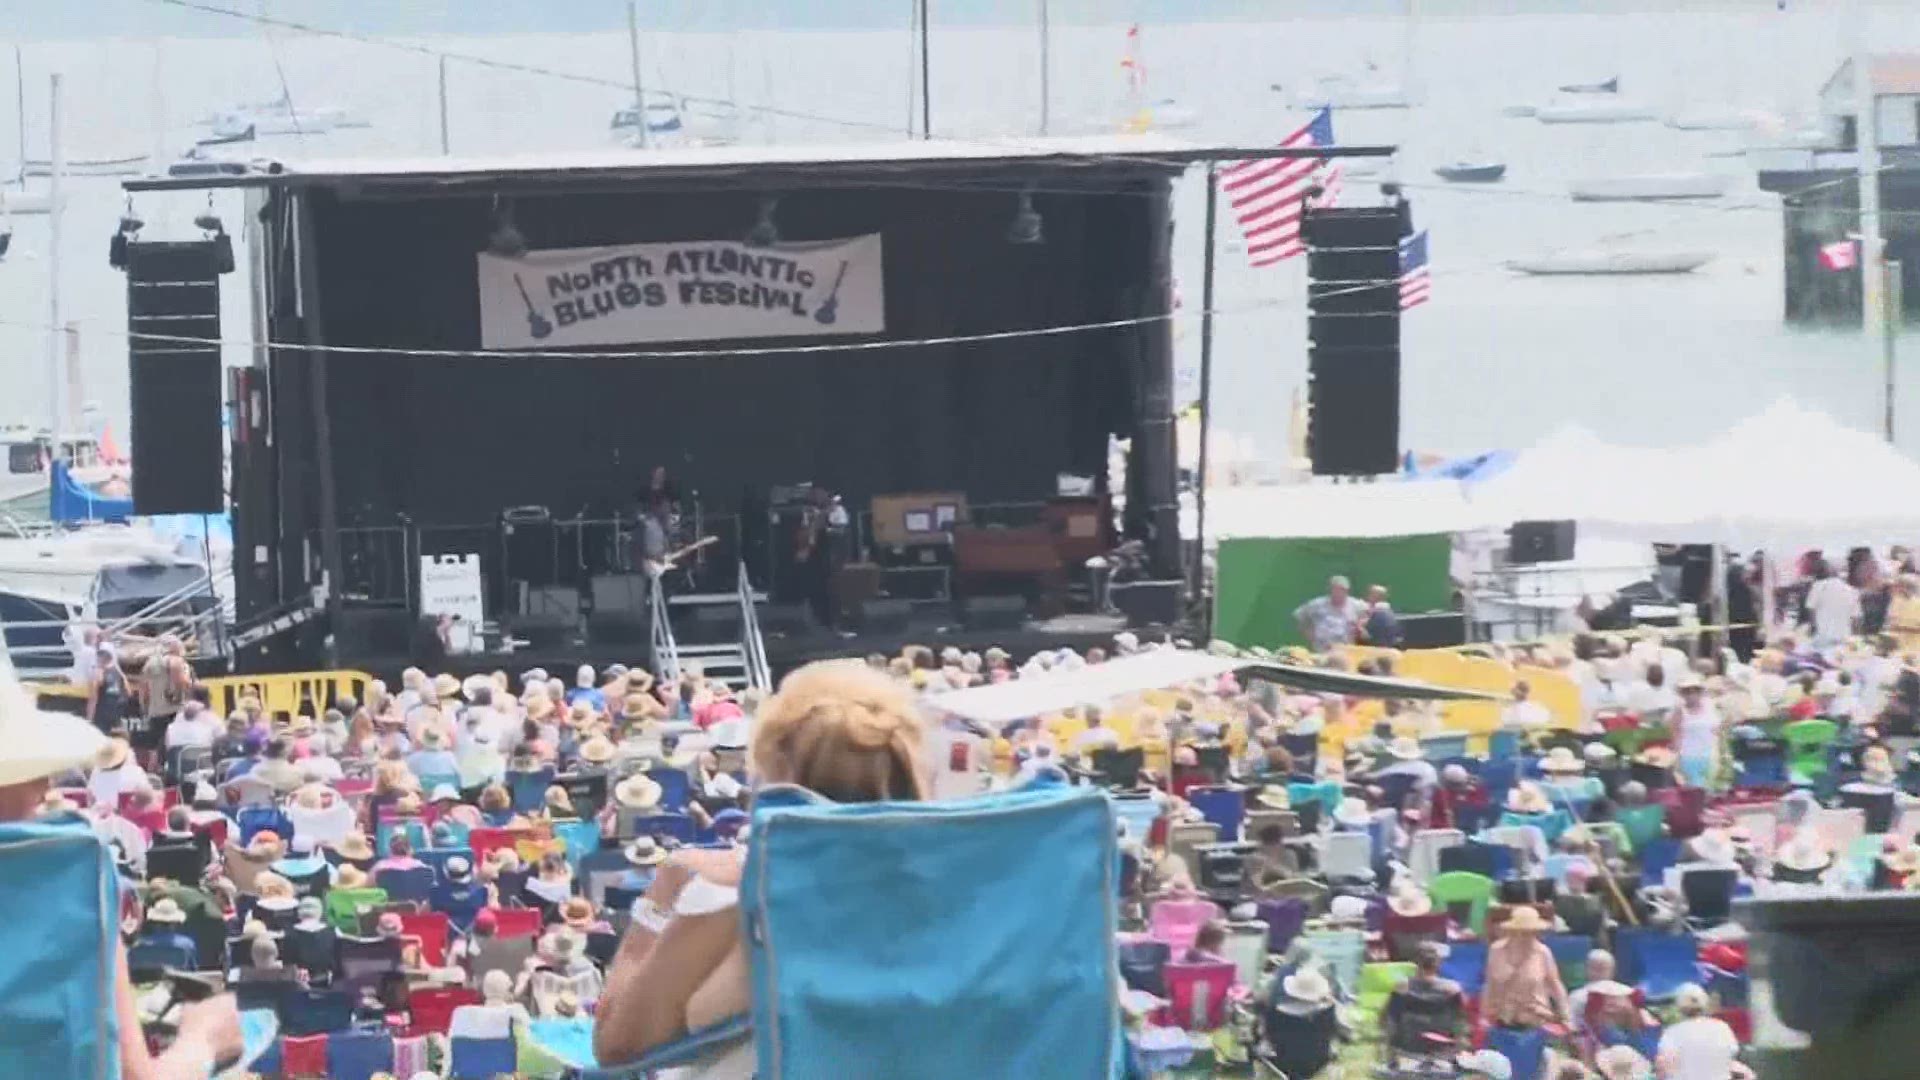 The North Atlantic Blues Festival is a big, two day  celebration of American blues music and it took last year off because of the pandemic.